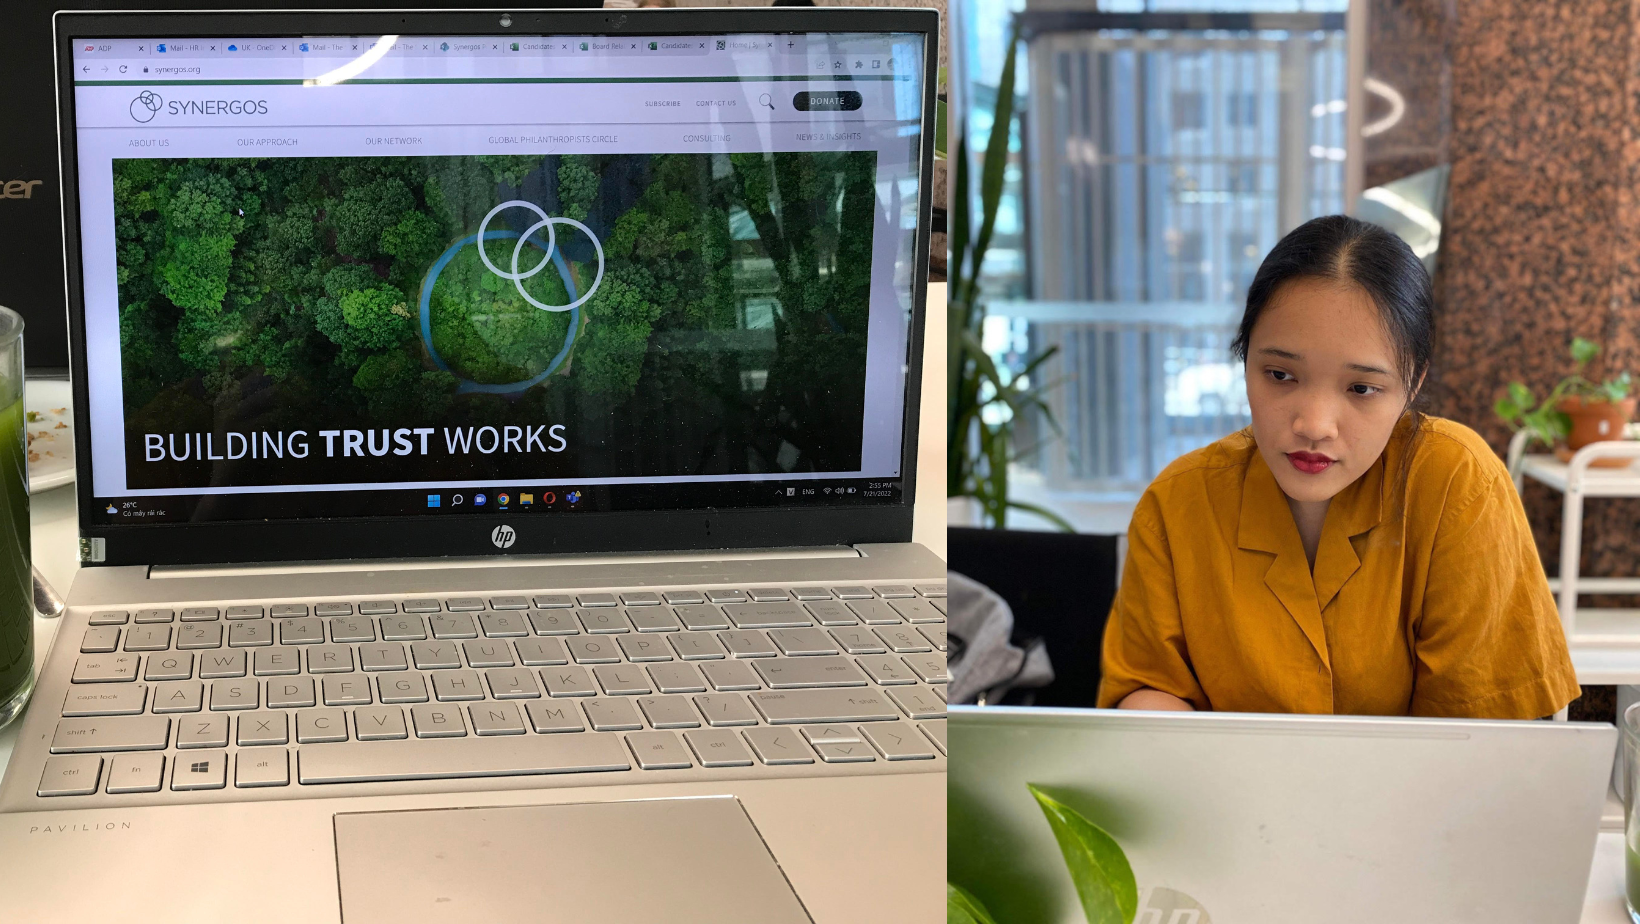 On the left, Thu's computer showing the Synergos page, on the right, Thu working on her computer